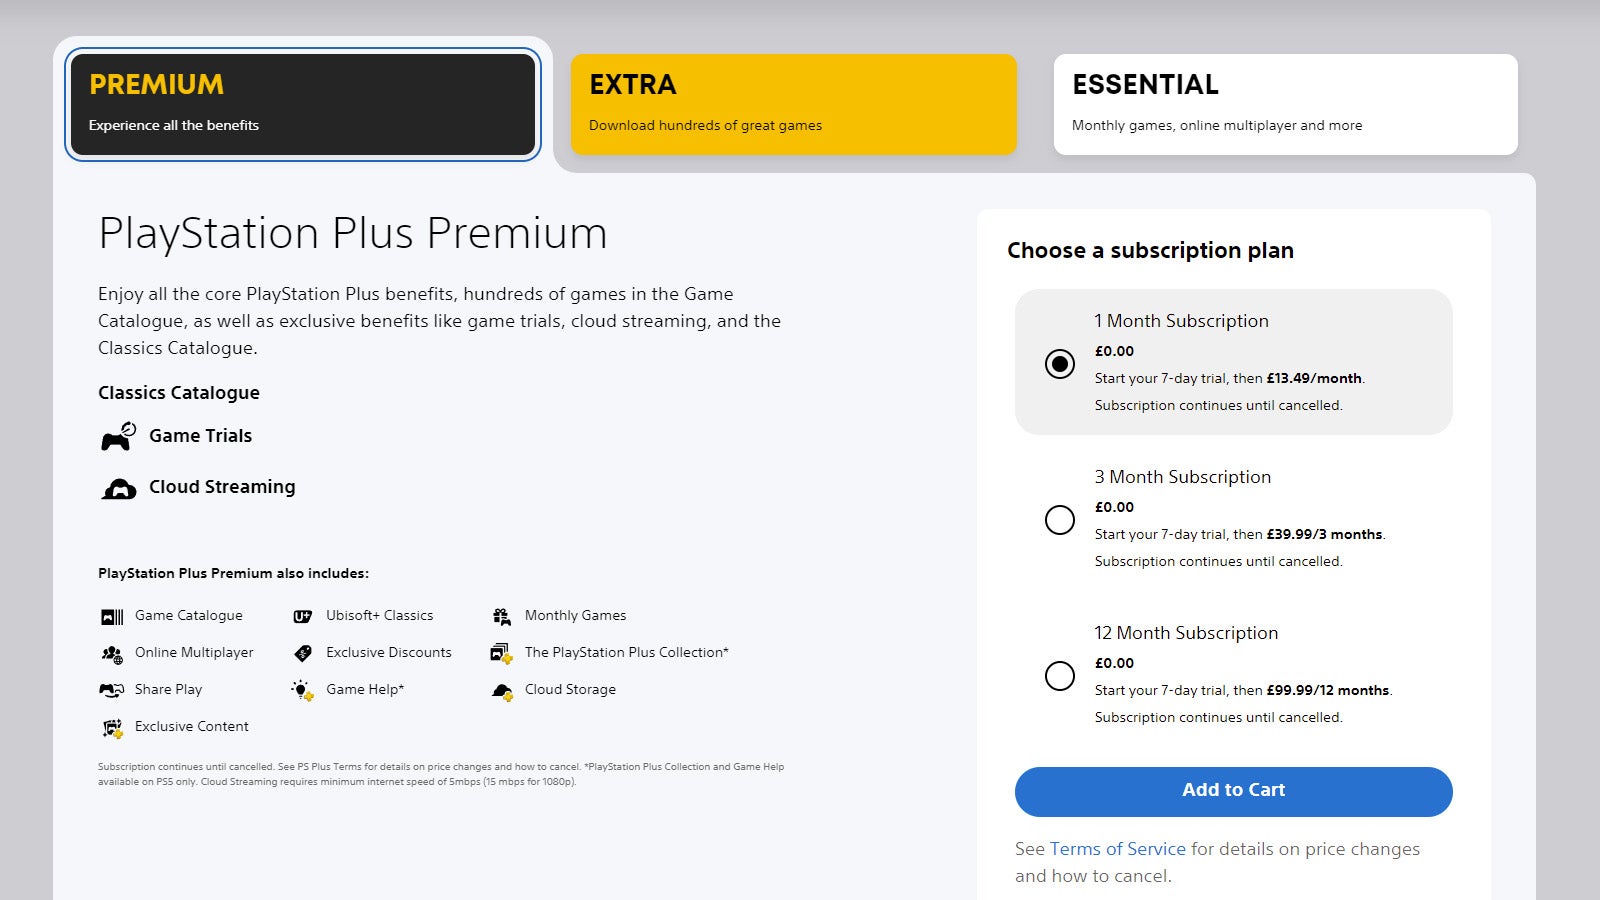 PlayStation Plus Extra and Premium now have sevenday free trial